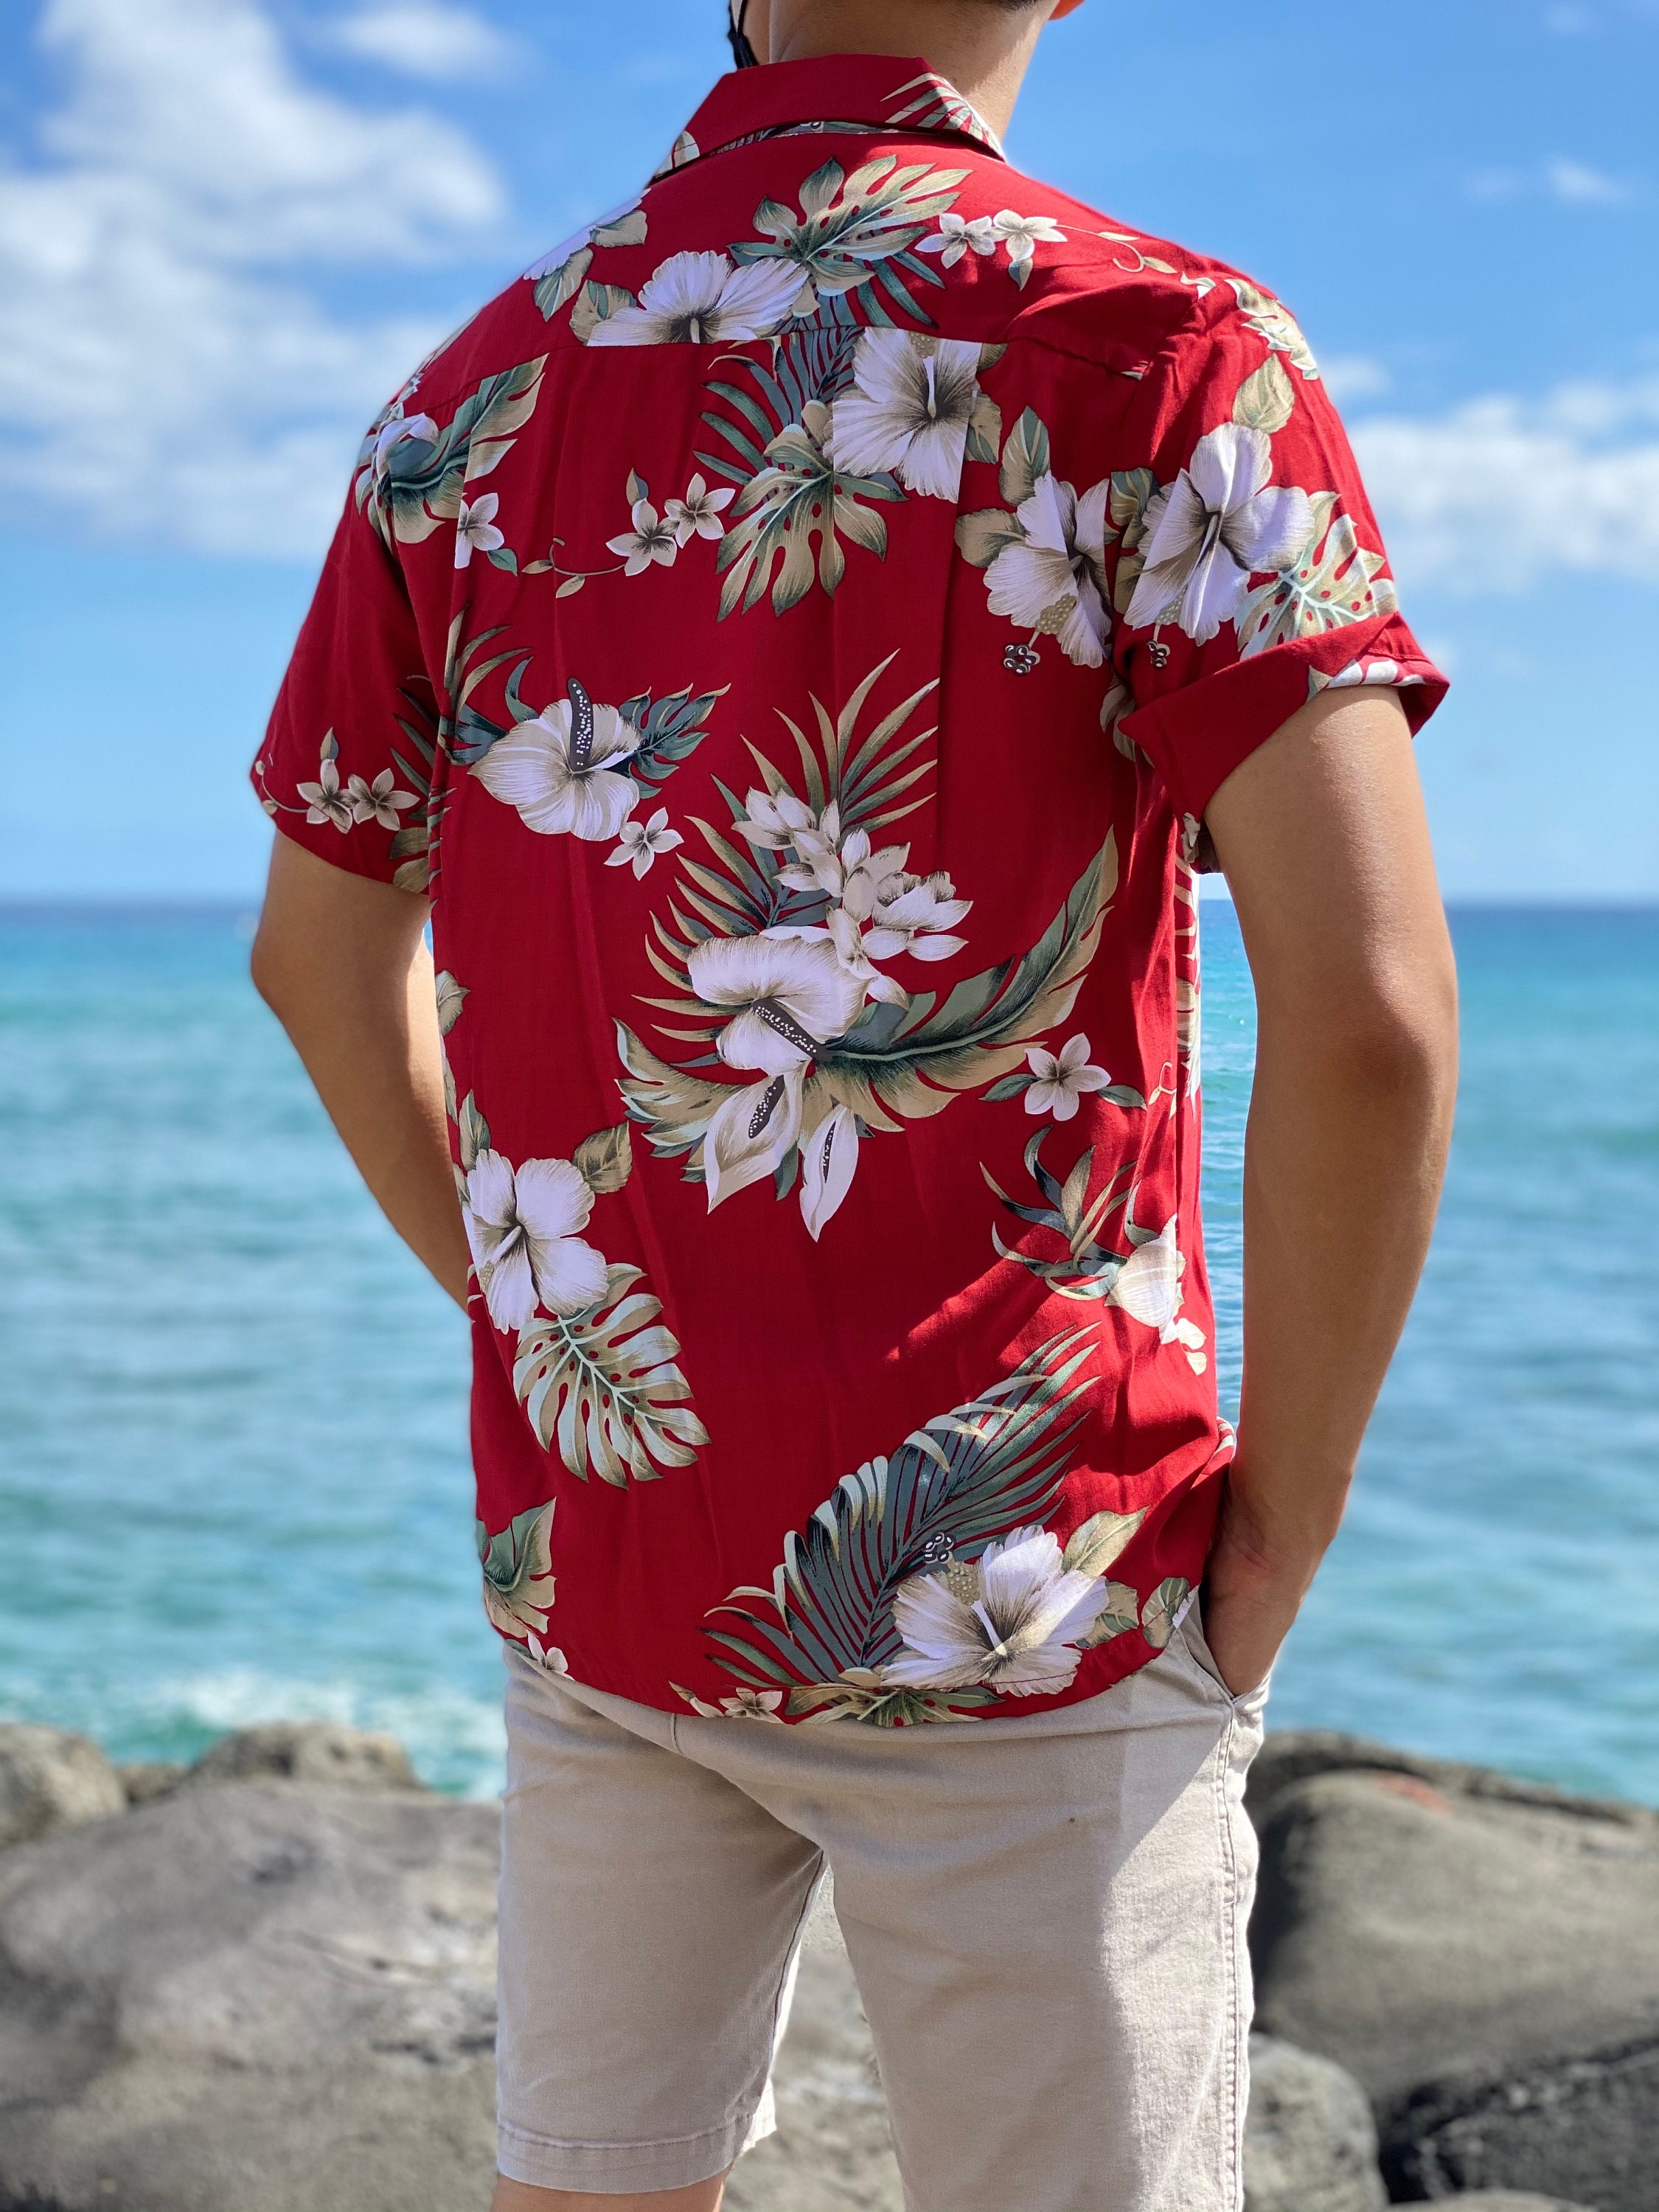 Made in Hawaii Super Soft Rayon Hawaiian Vintage Hibiscus Aloha Shirt - Up to 4XL5XL6XL7XL - Comfy Relaxed Fit Handmade Gift